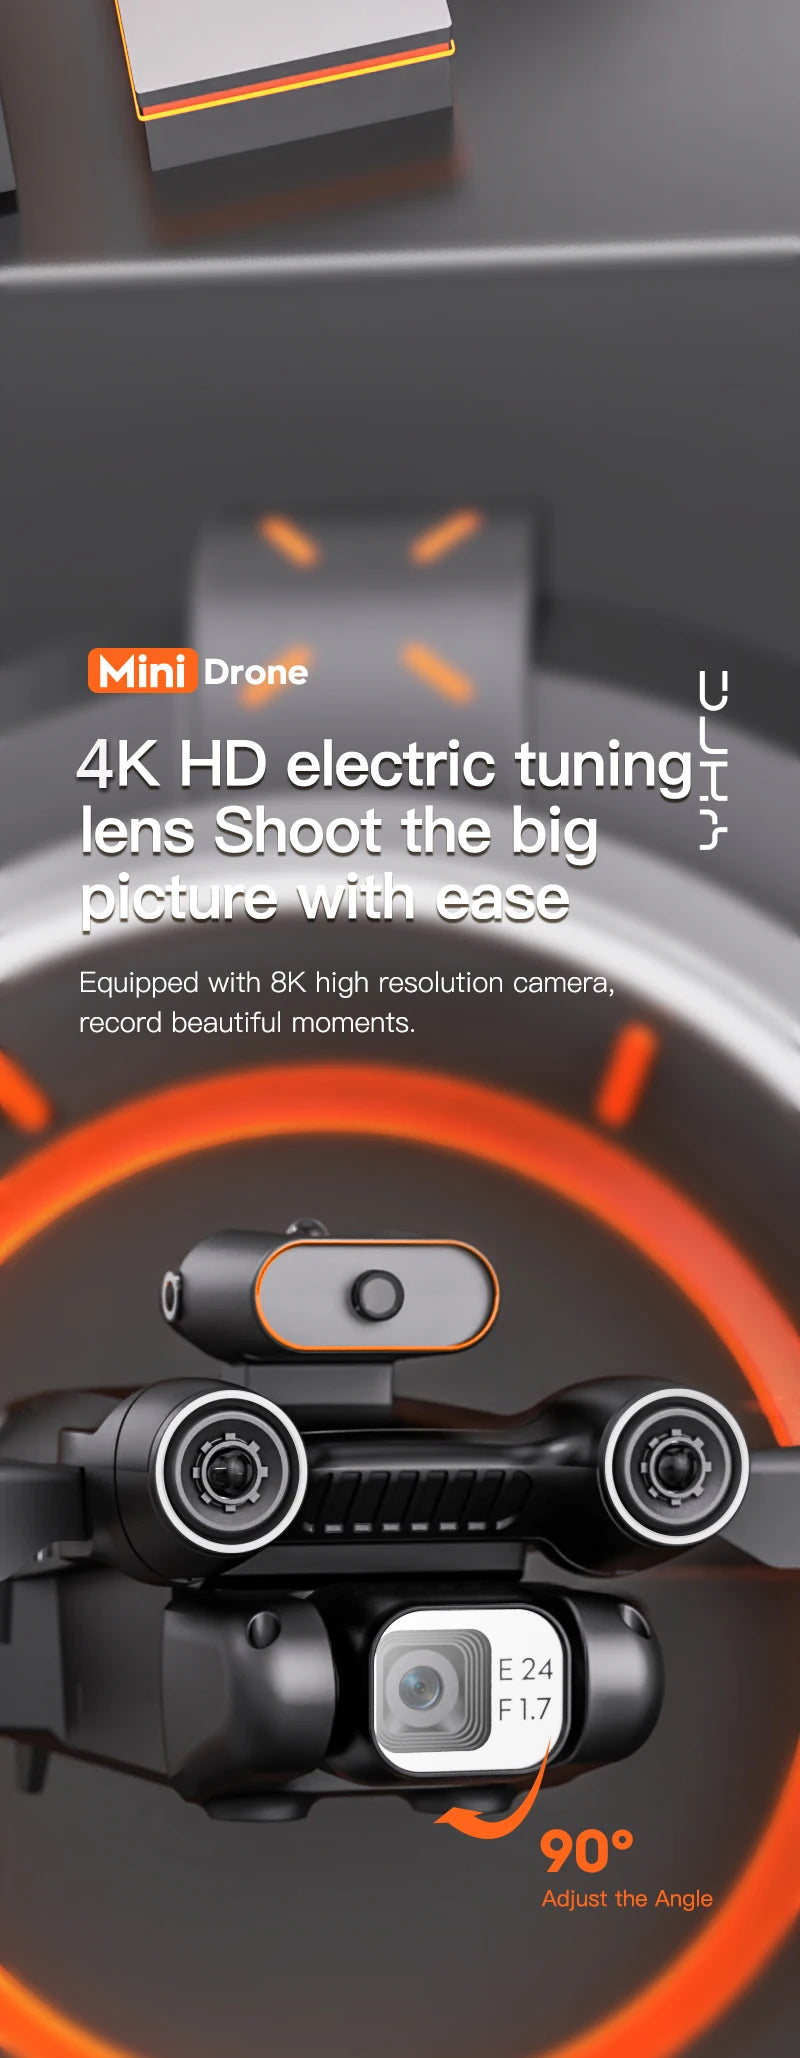 P12 Drone, mini drone 4k hd electric tuning_ 2 lens shoot the